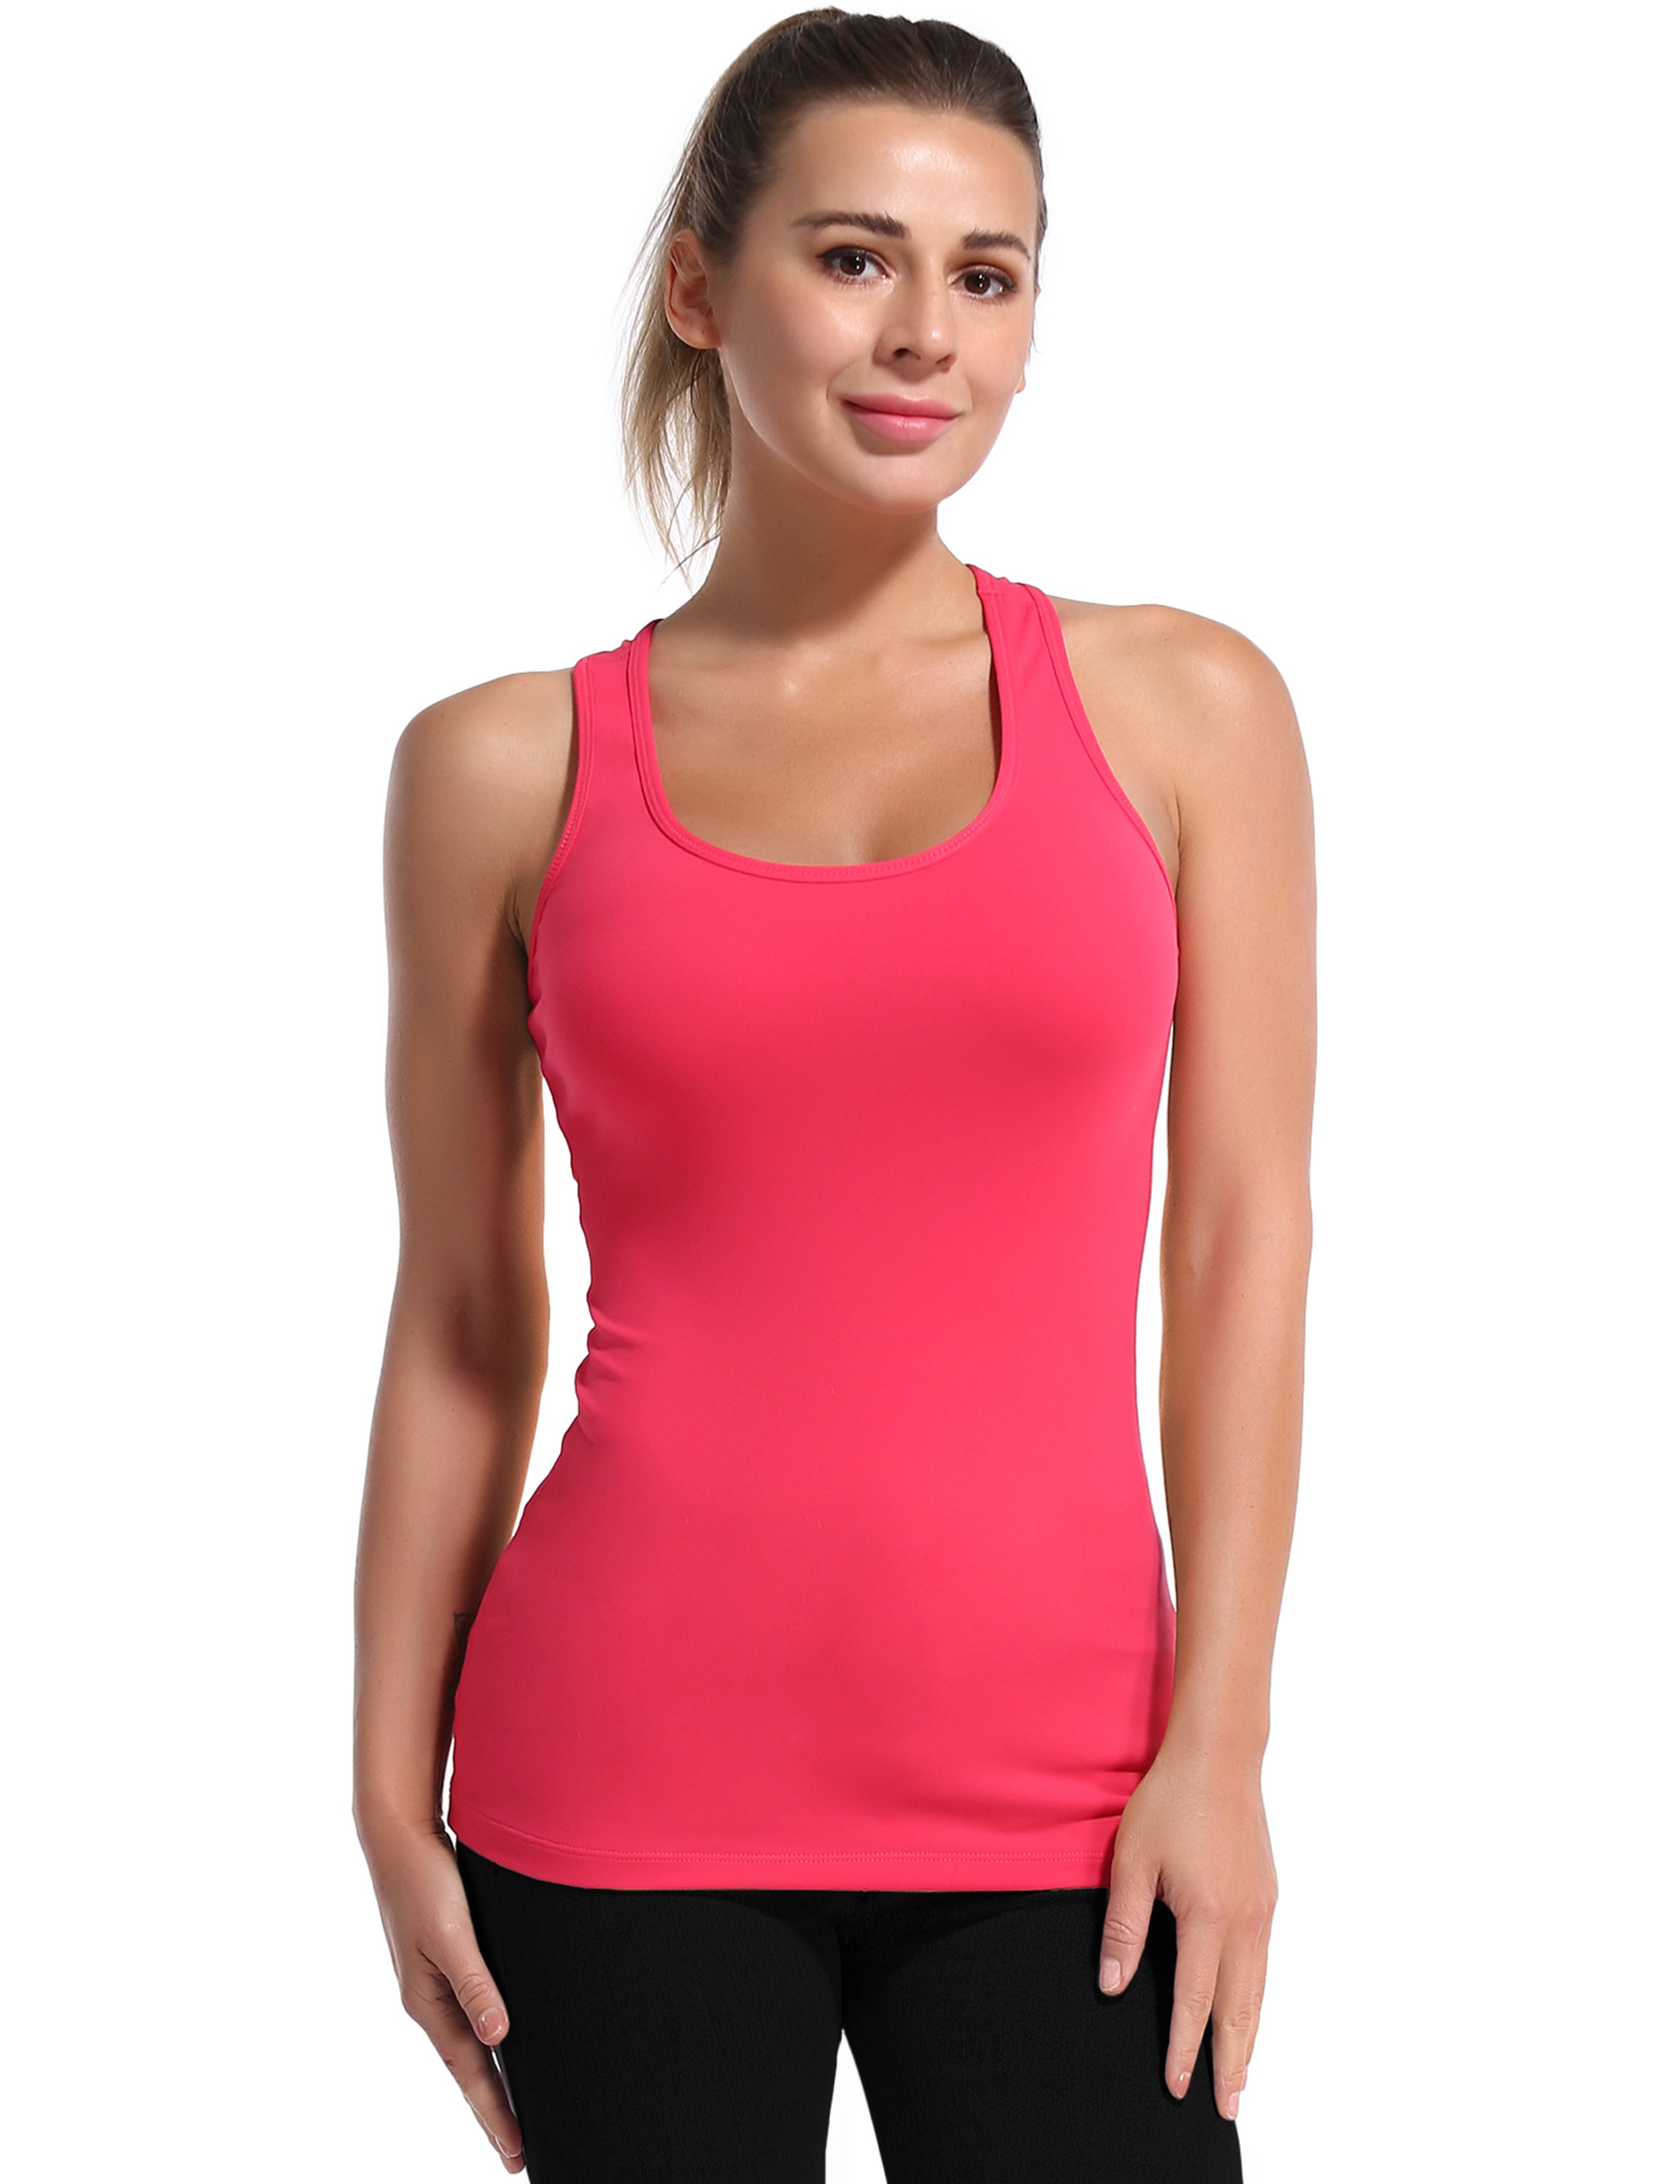 Racerback Athletic Tank Tops red 92%Nylon/8%Spandex(Cotton Soft) Designed for Gym Tight Fit So buttery soft, it feels weightless Sweat-wicking Four-way stretch Breathable Contours your body Sits below the waistband for moderate, everyday coverage